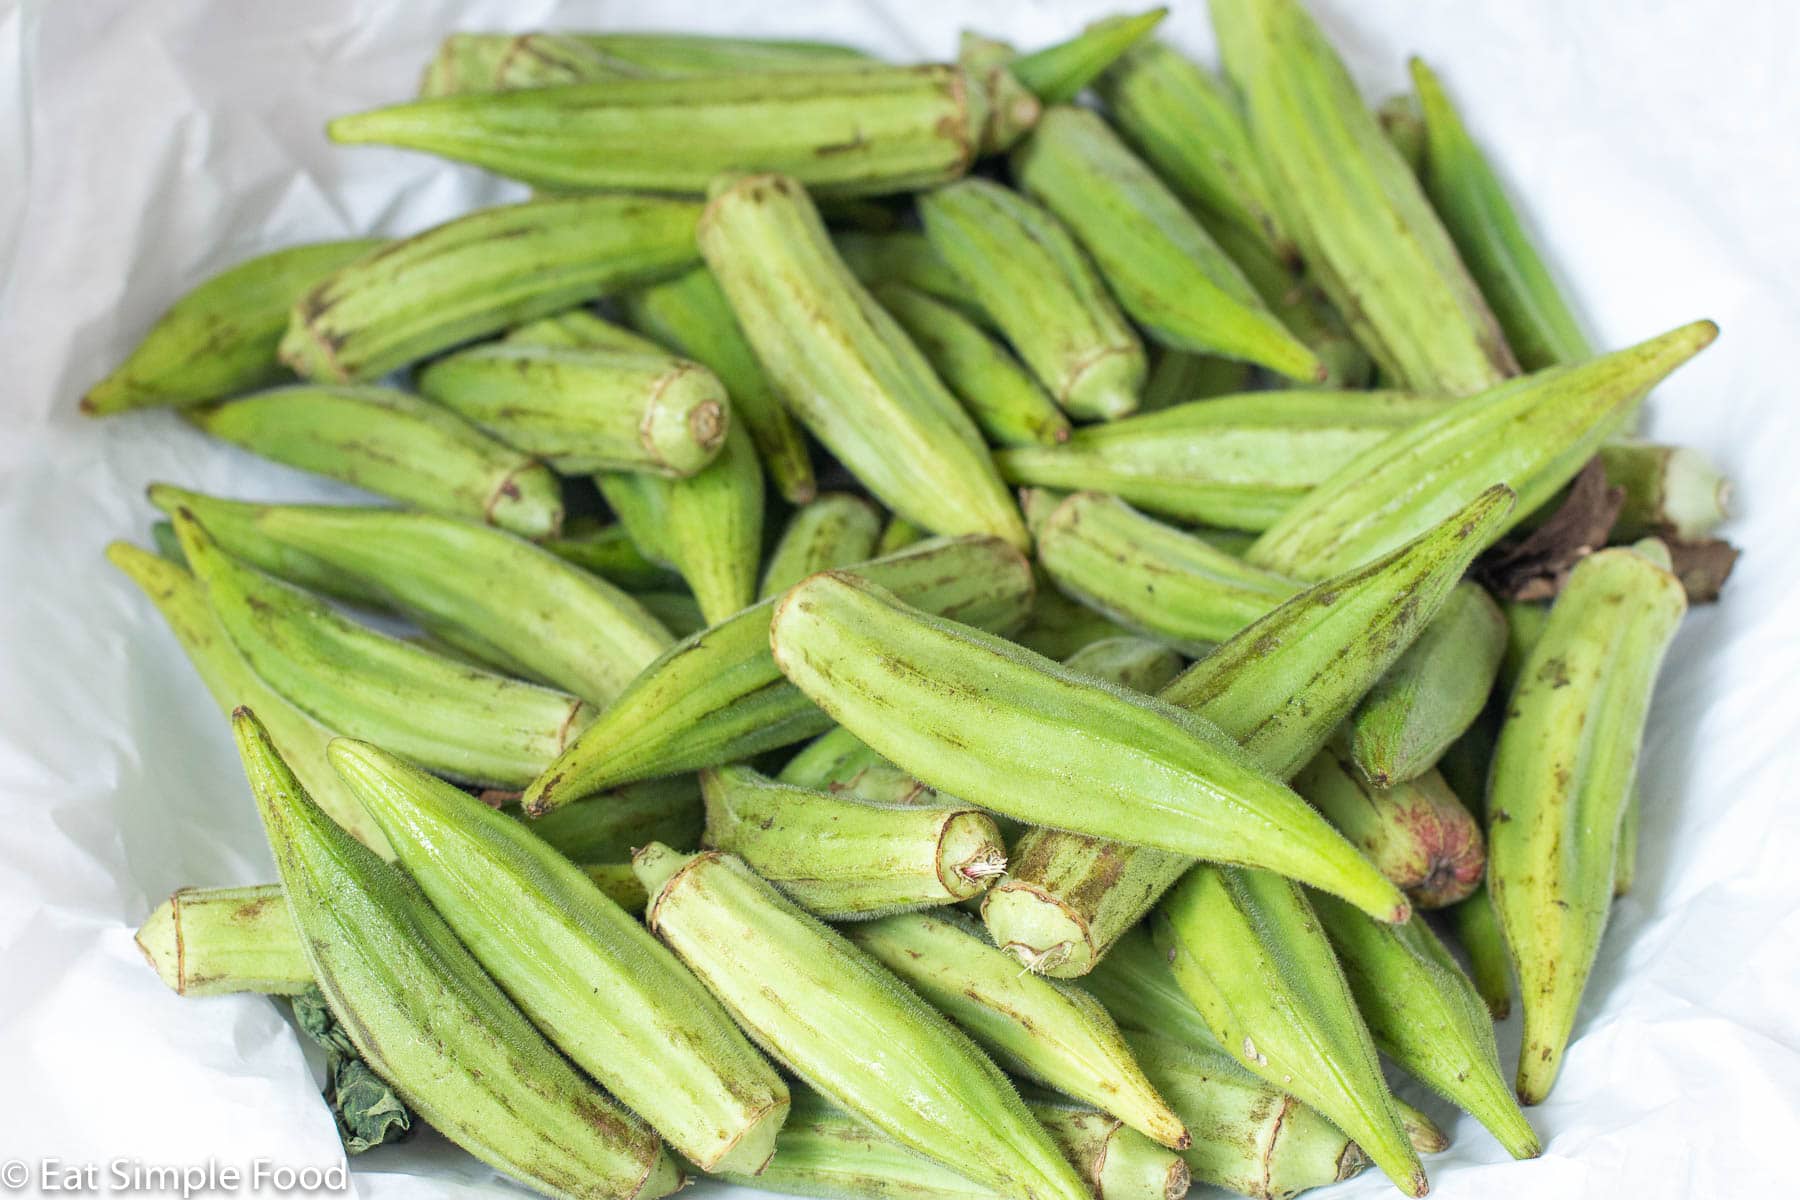 Whole fresh okra packed tightly on white lined parchment paper.